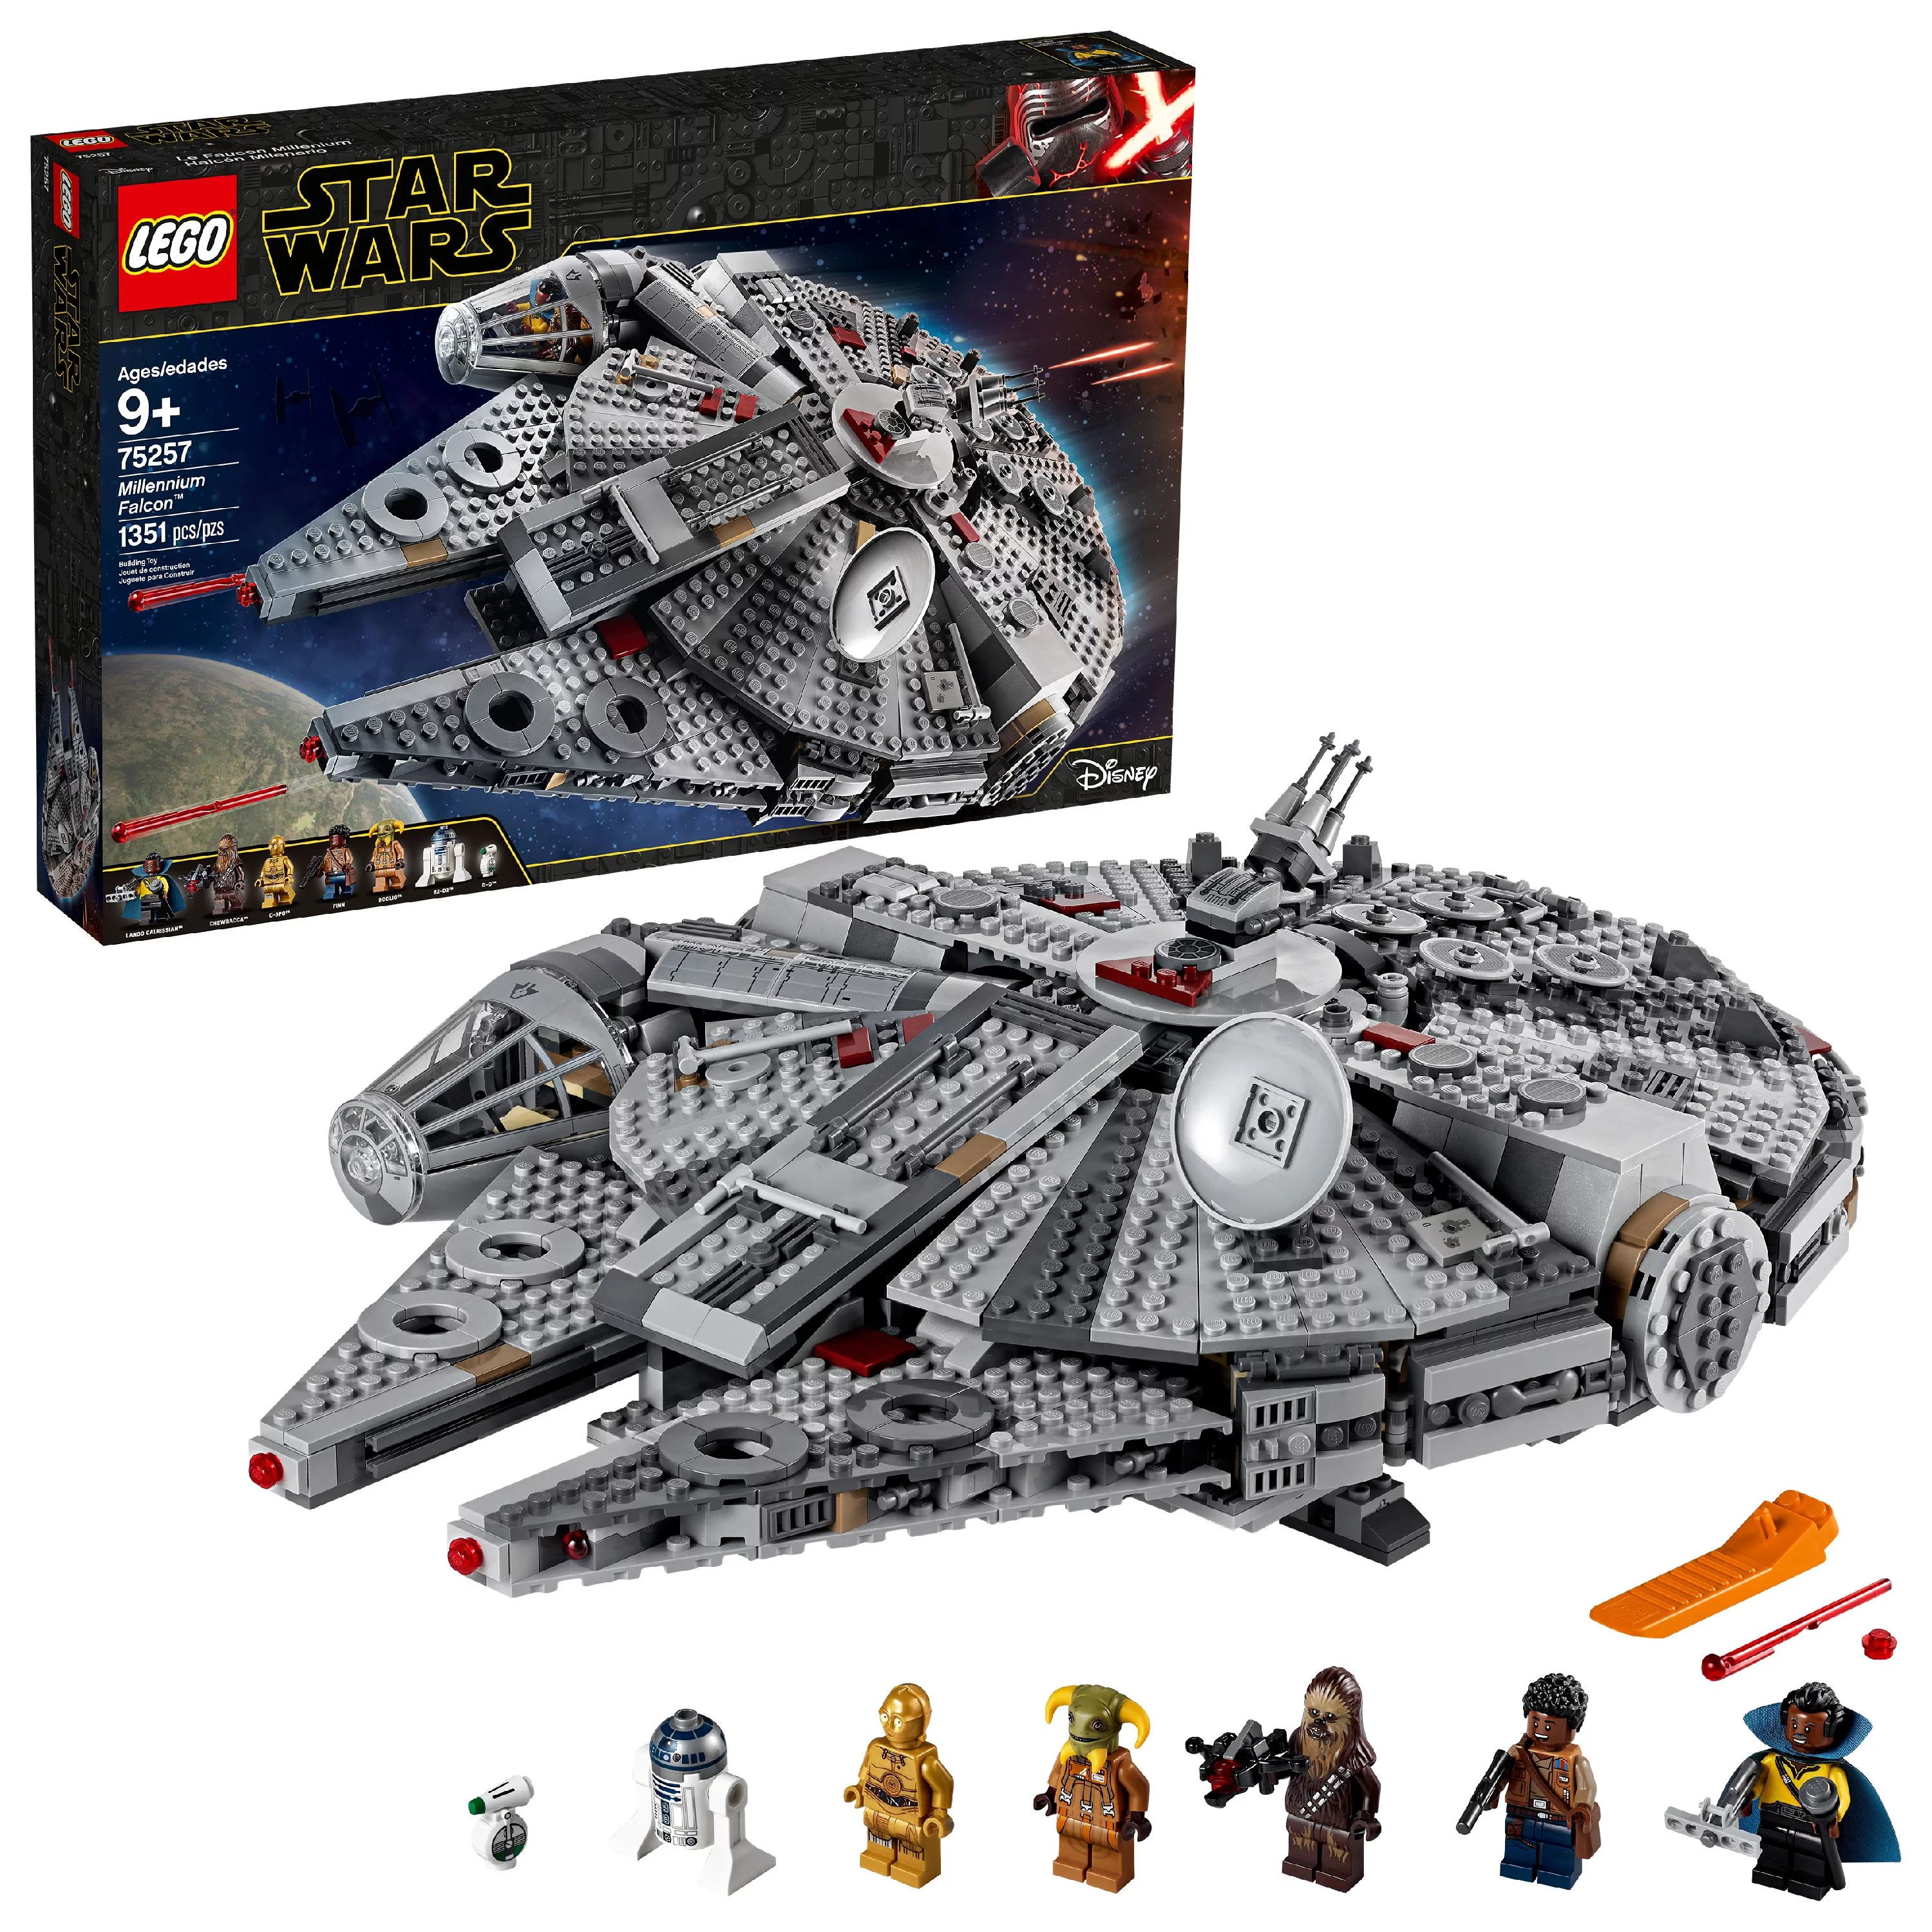 LEGO Star Wars Millennium Falcon 75257 Starship Construction Set, with Finn, Chewbacca, Lando Calrissian, Boolio, C-3PO, R2-D2 and D-O, The Rise of Skywalker Collection